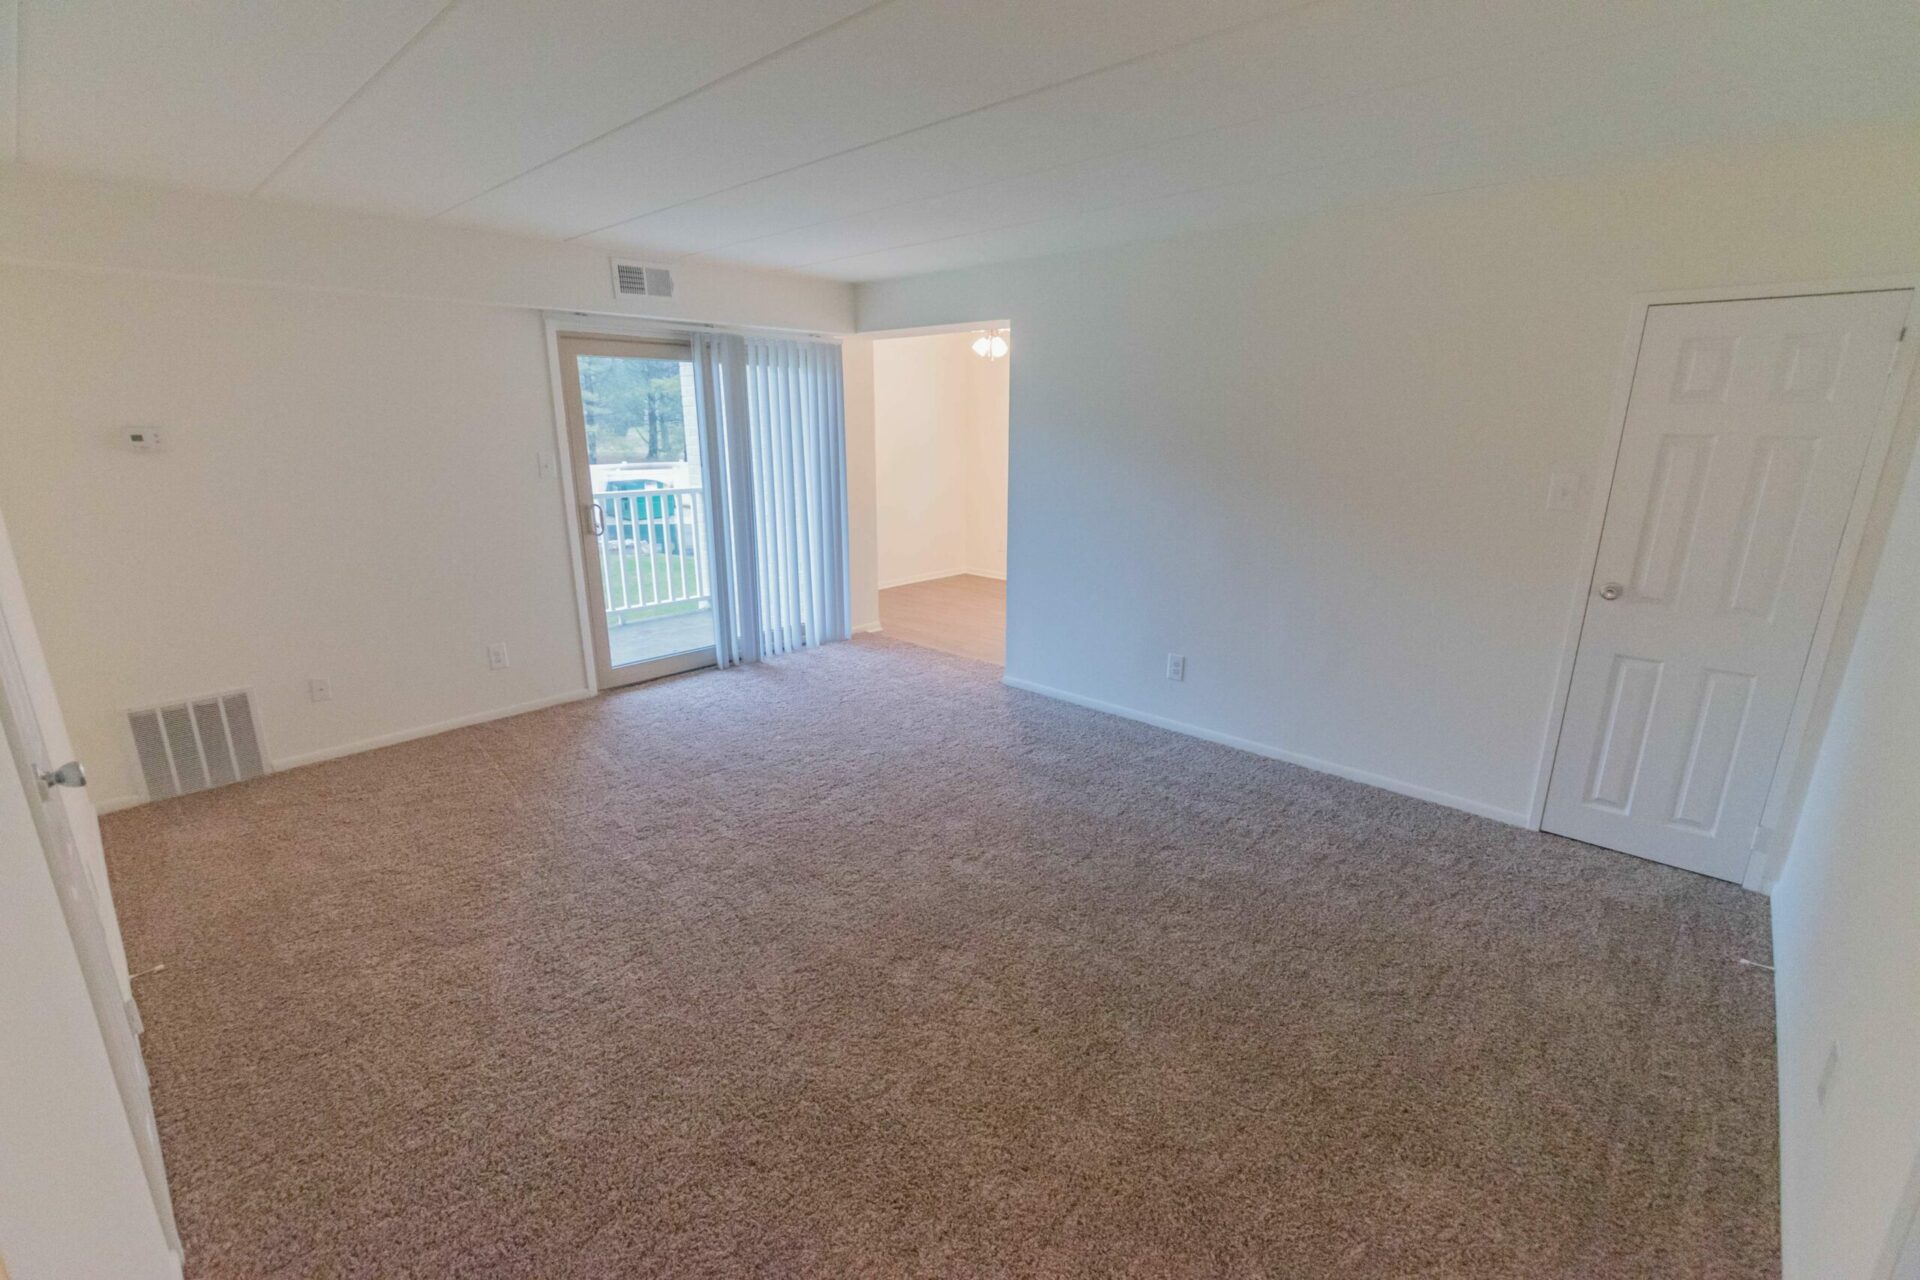 Living room area of an apartment unfurnished, fitted with carpet flooring, a high ceiling, and slide door to patio